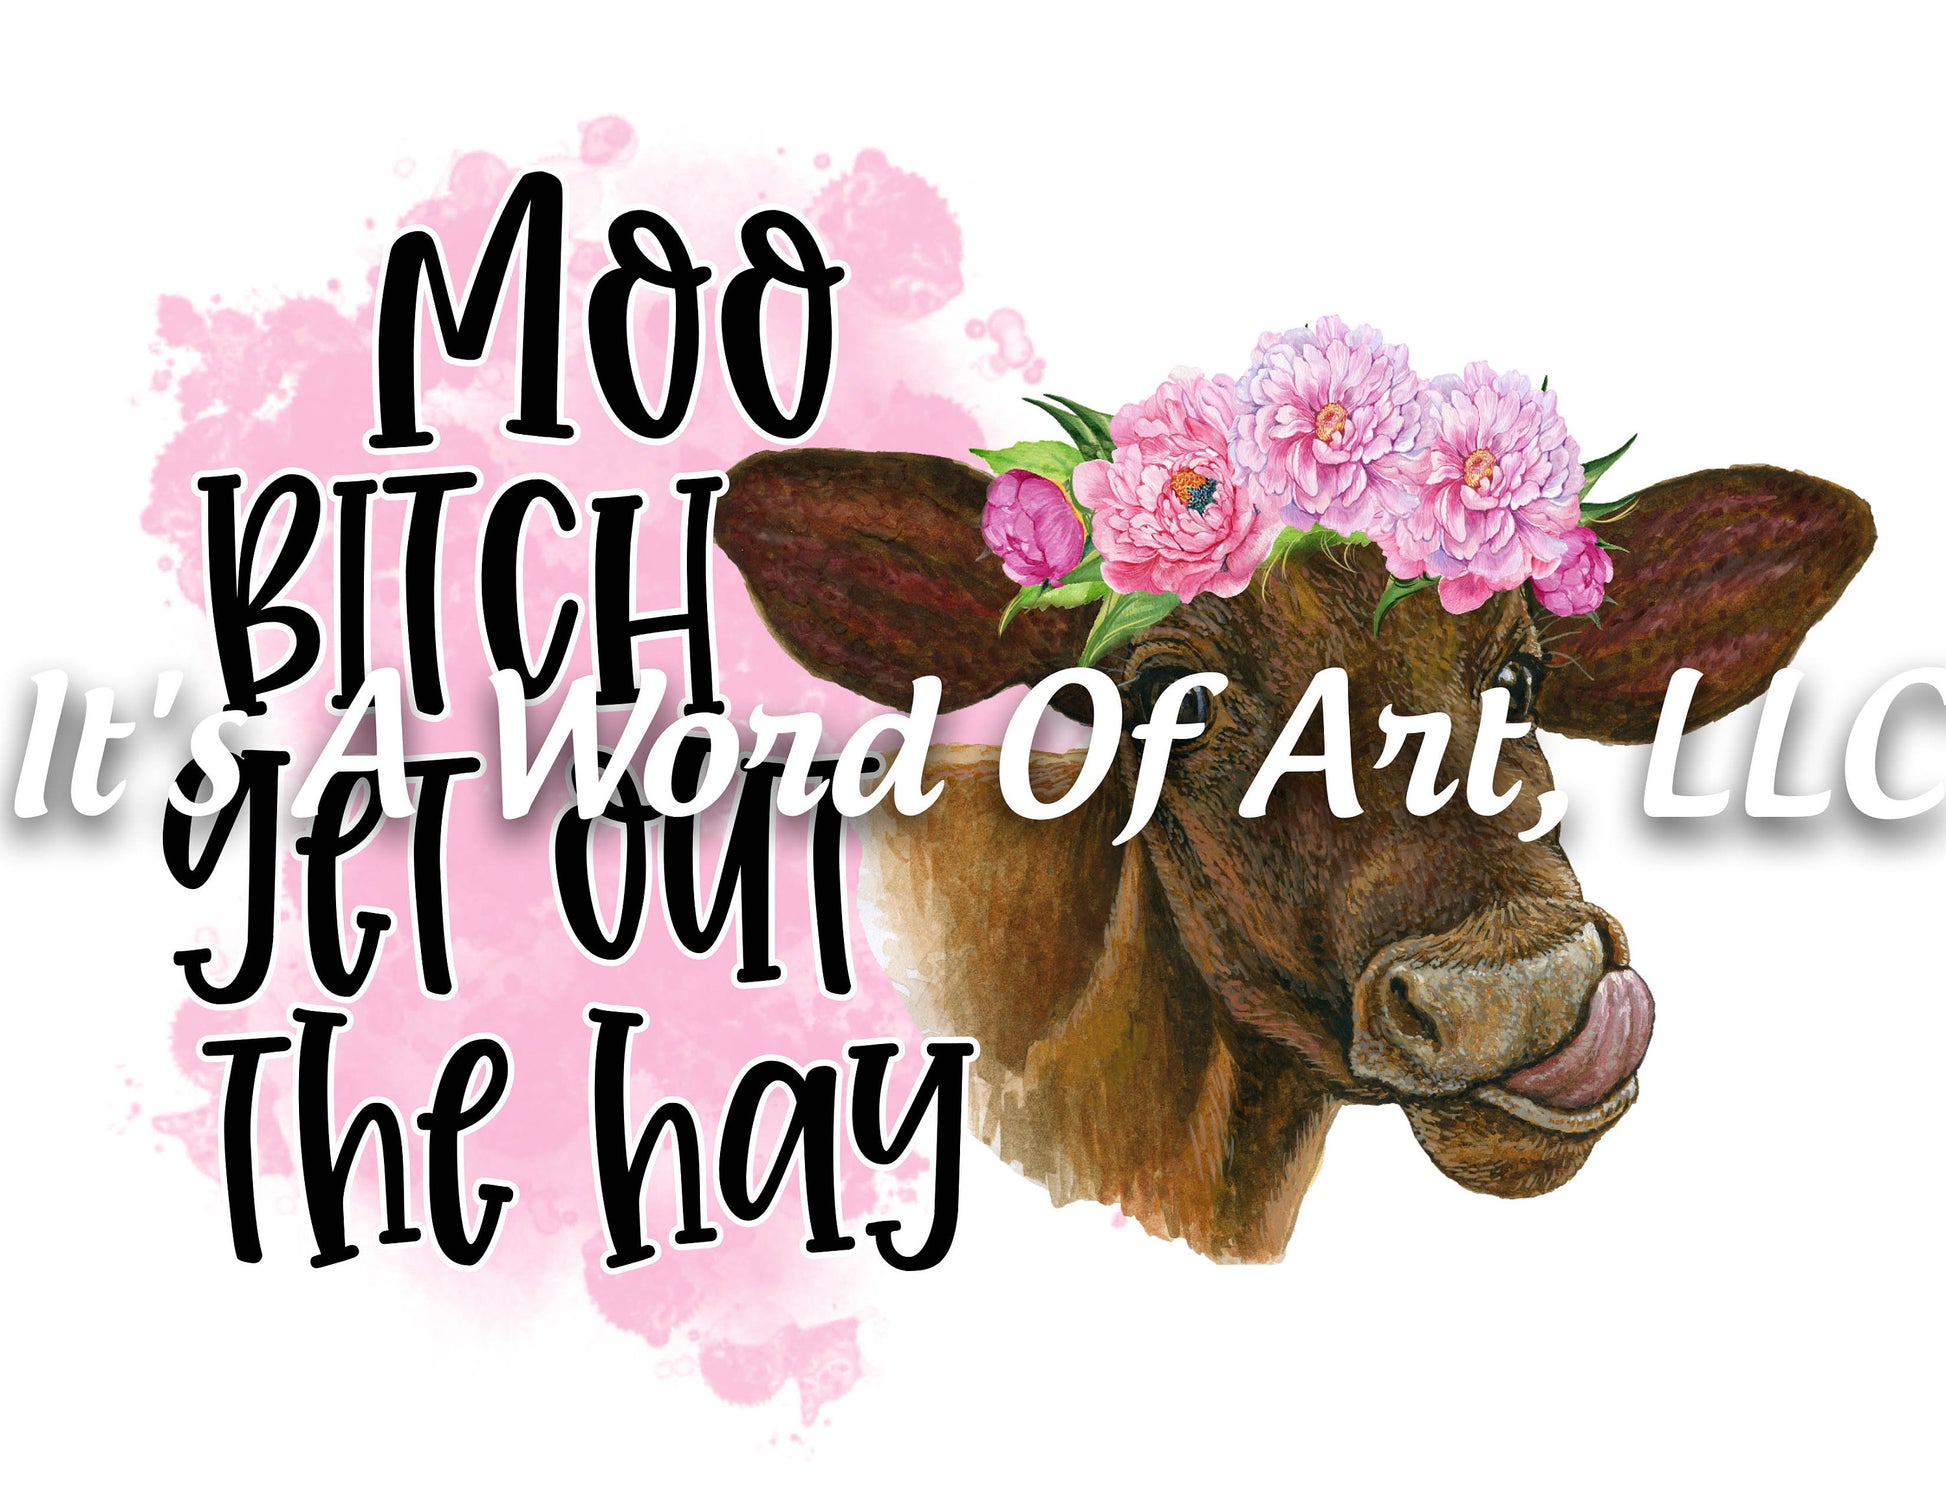 NSFW 1 - Moo Bitch Get Out the Hay Cow Funny Shirt - Sublimation Transfer Set/Ready To Press Sublimation Transfer/Sublimation Transfer